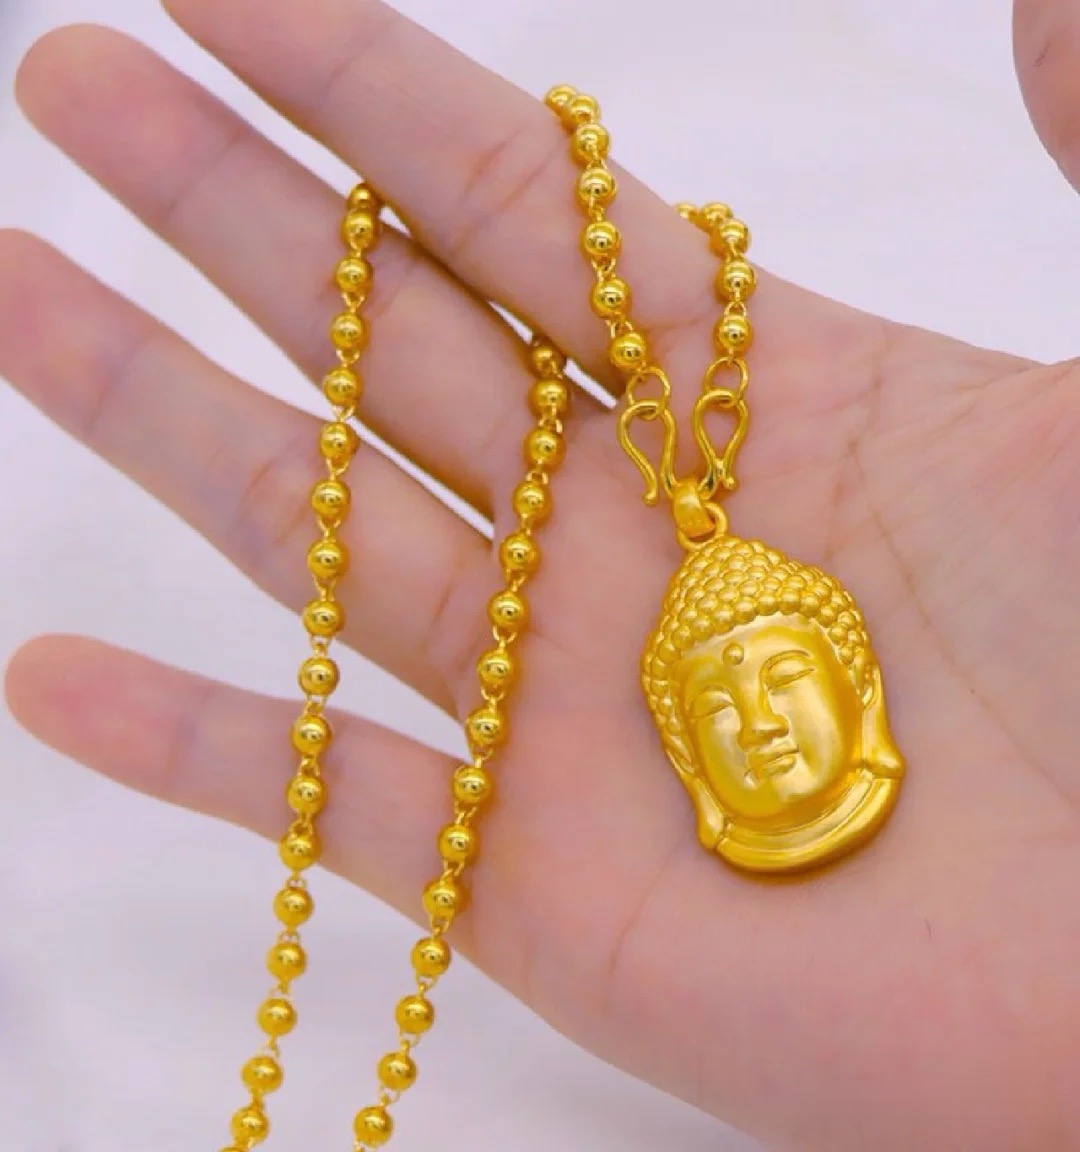 Alluvial Gold Ancient Method Vacuum Electroplating 24K Gold Buddha Head Necklace